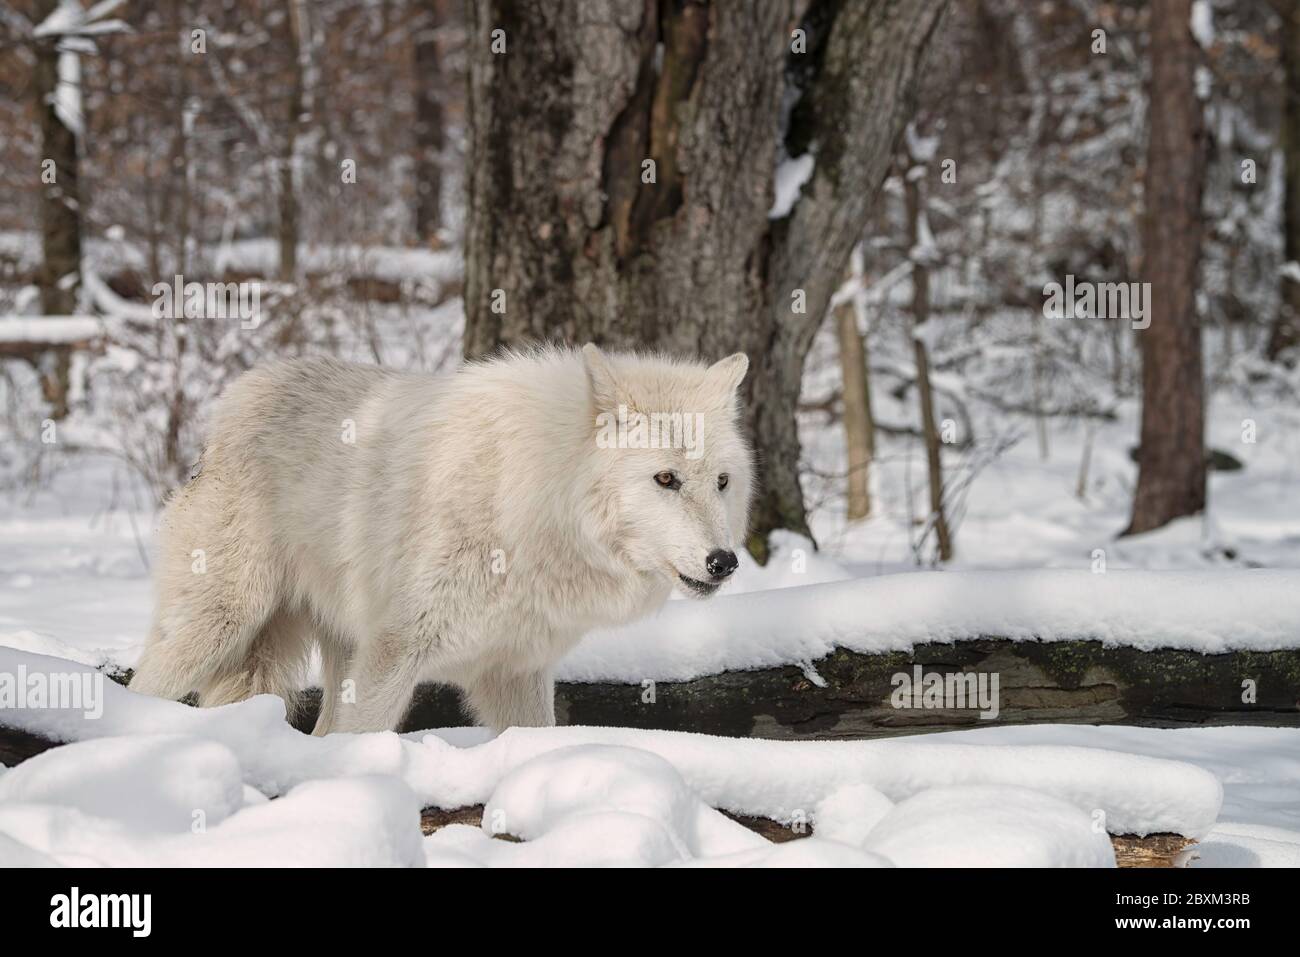 Timber (also known as a gray or grey) wolf in the snow Stock Photo